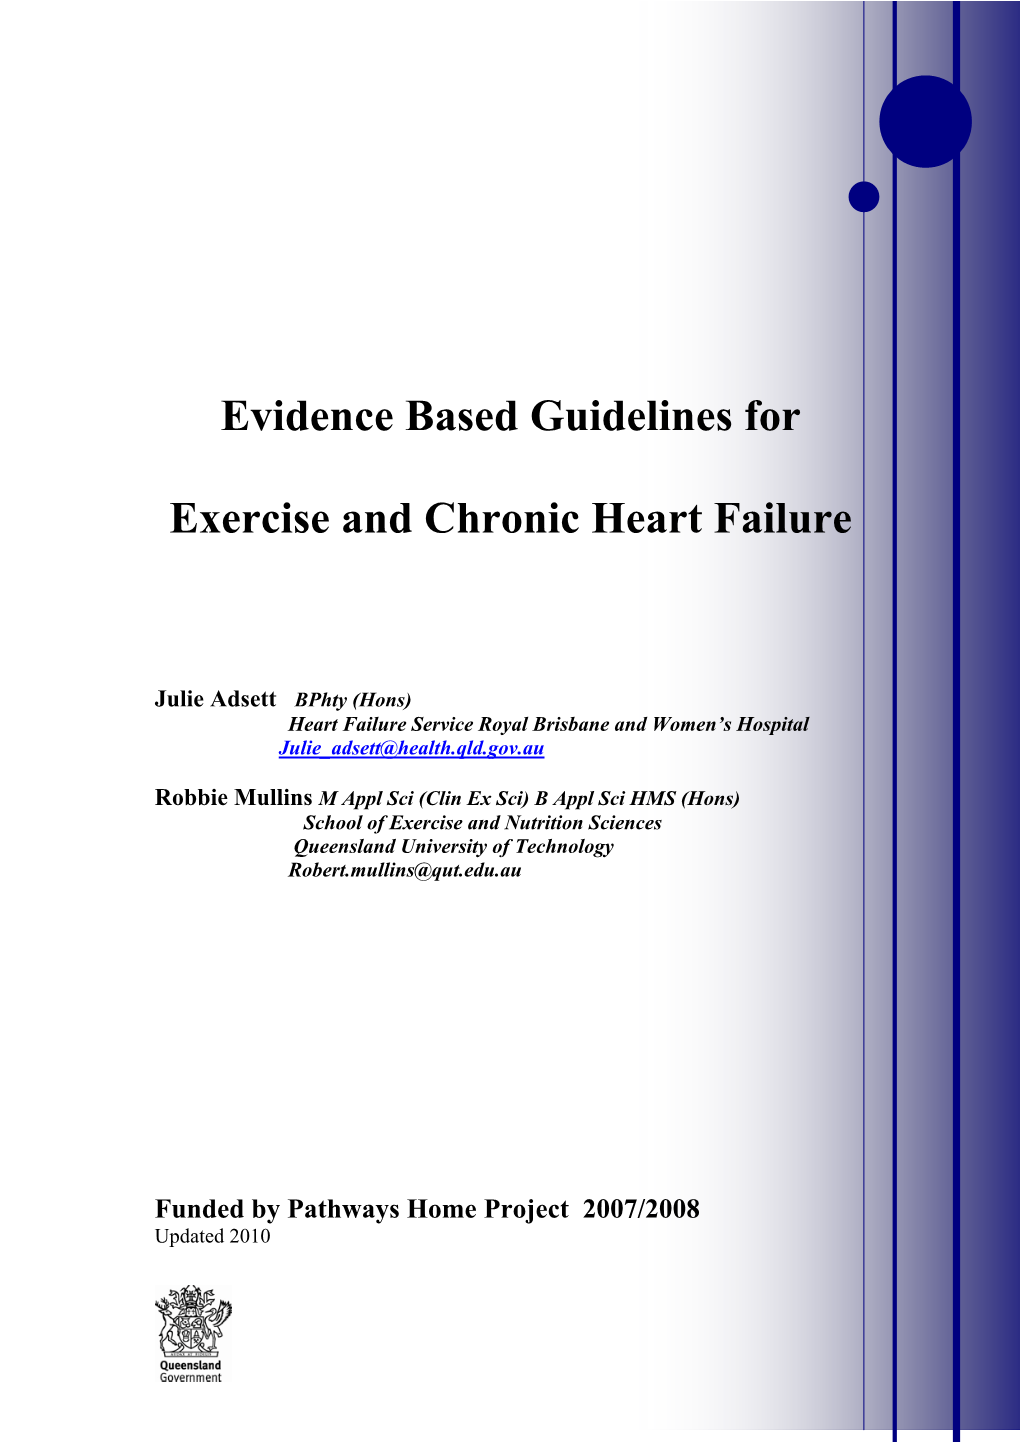 Evidence Based Guidelines for Exercise and Chronic Heart Failure